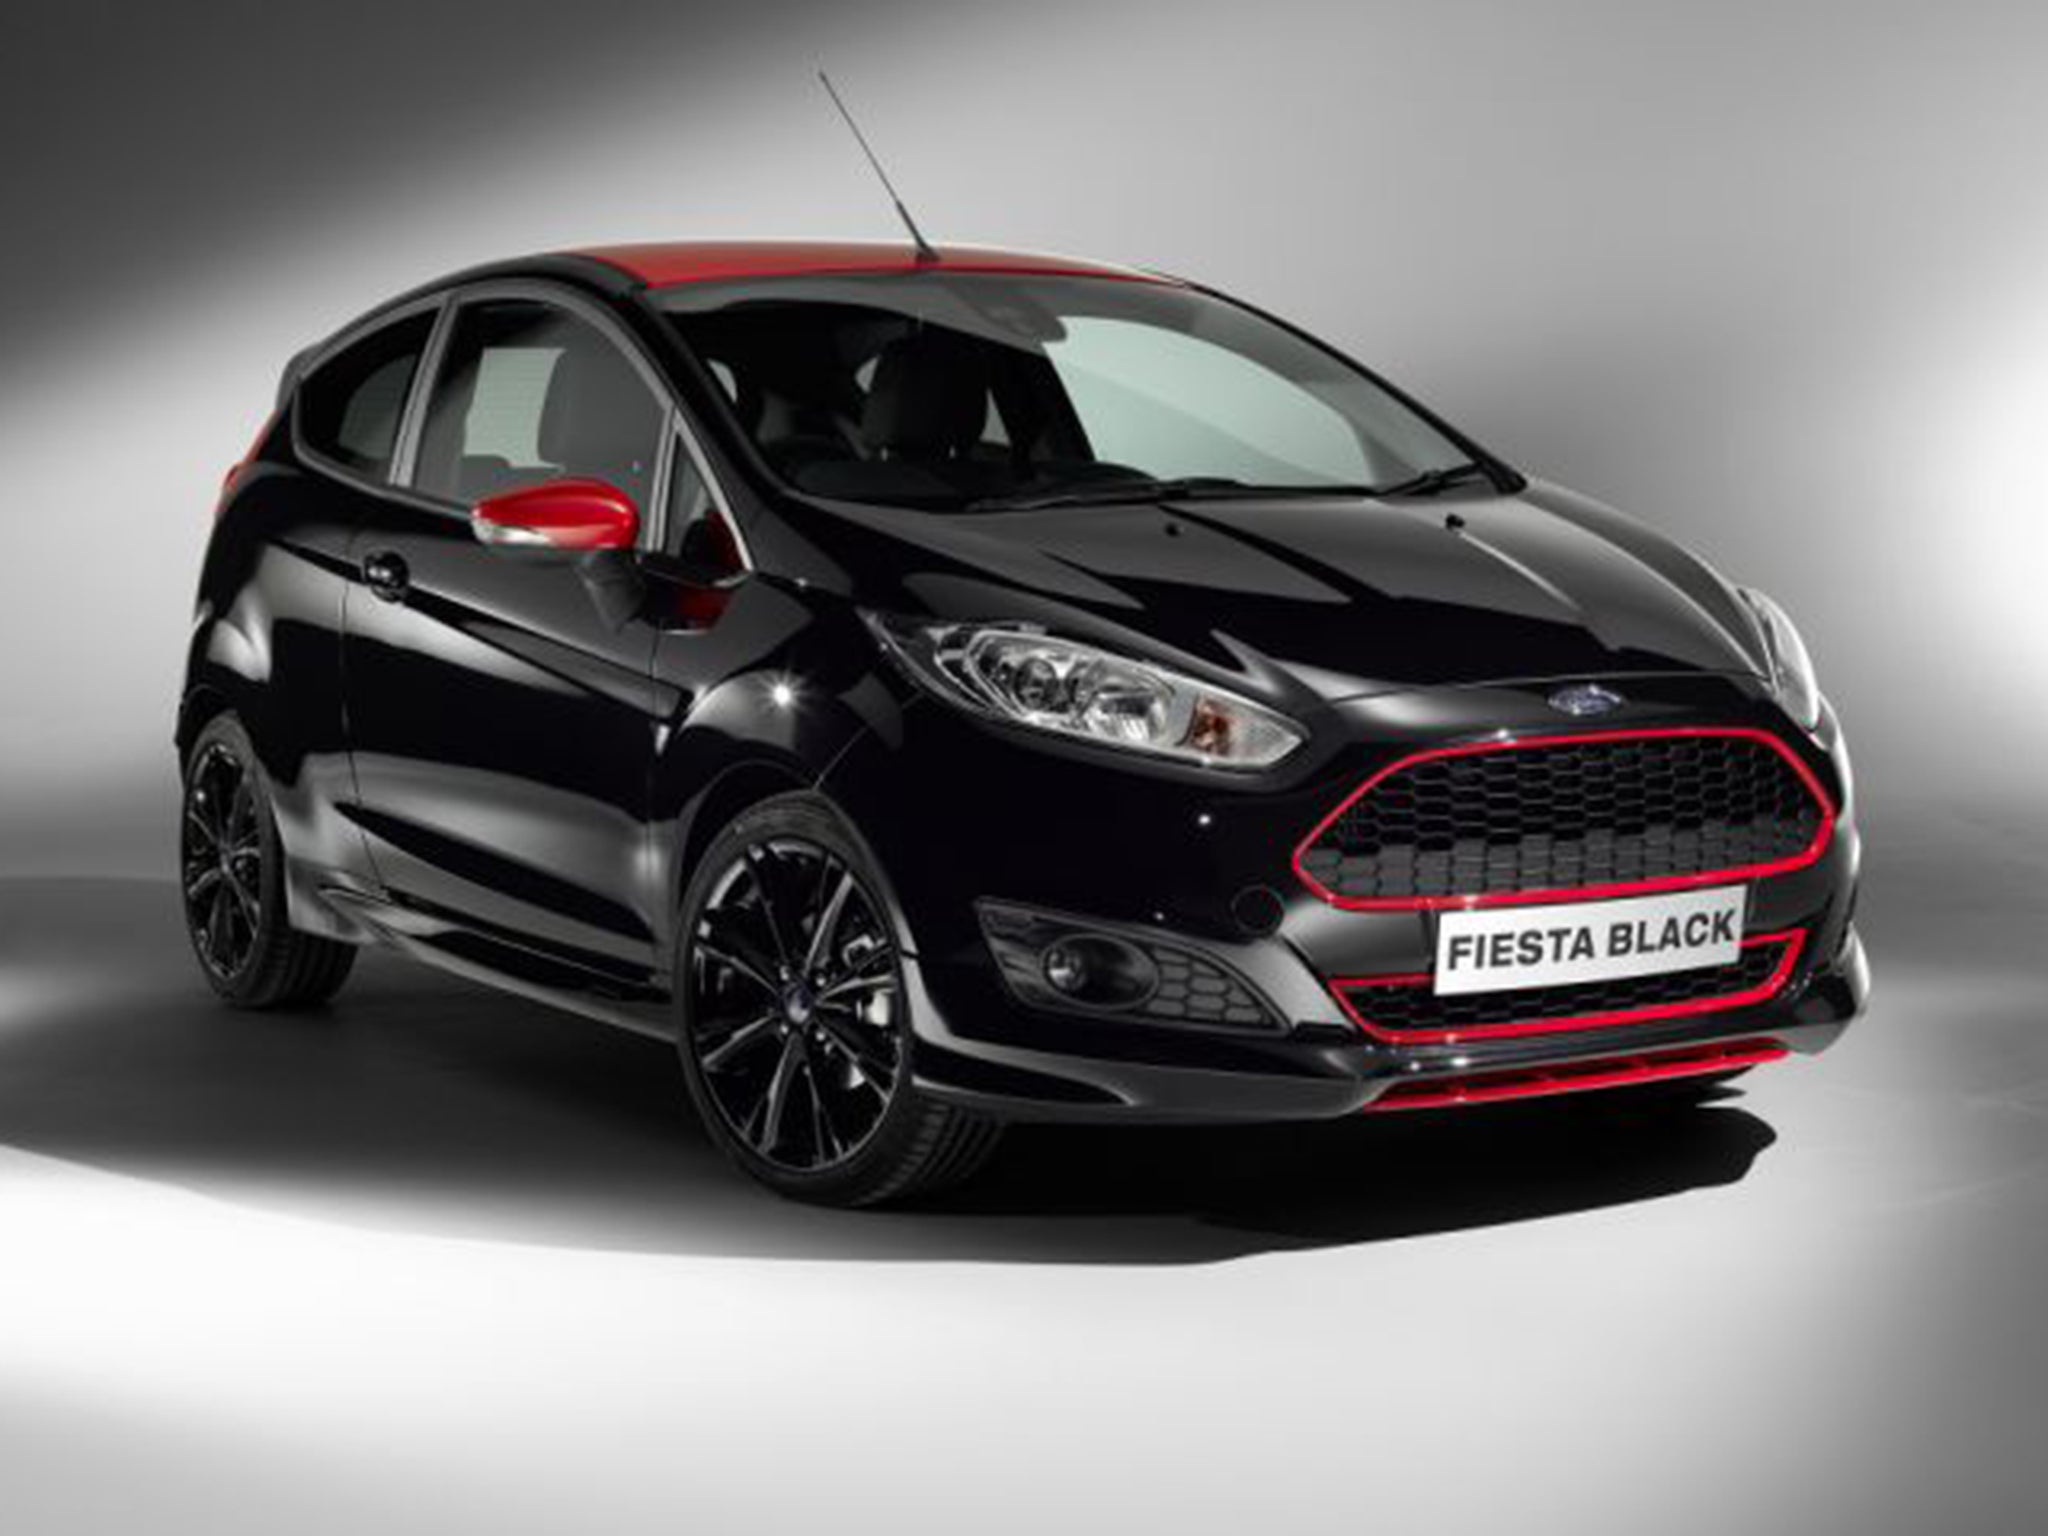 The Ford Fiesta is Britain’s most popular car